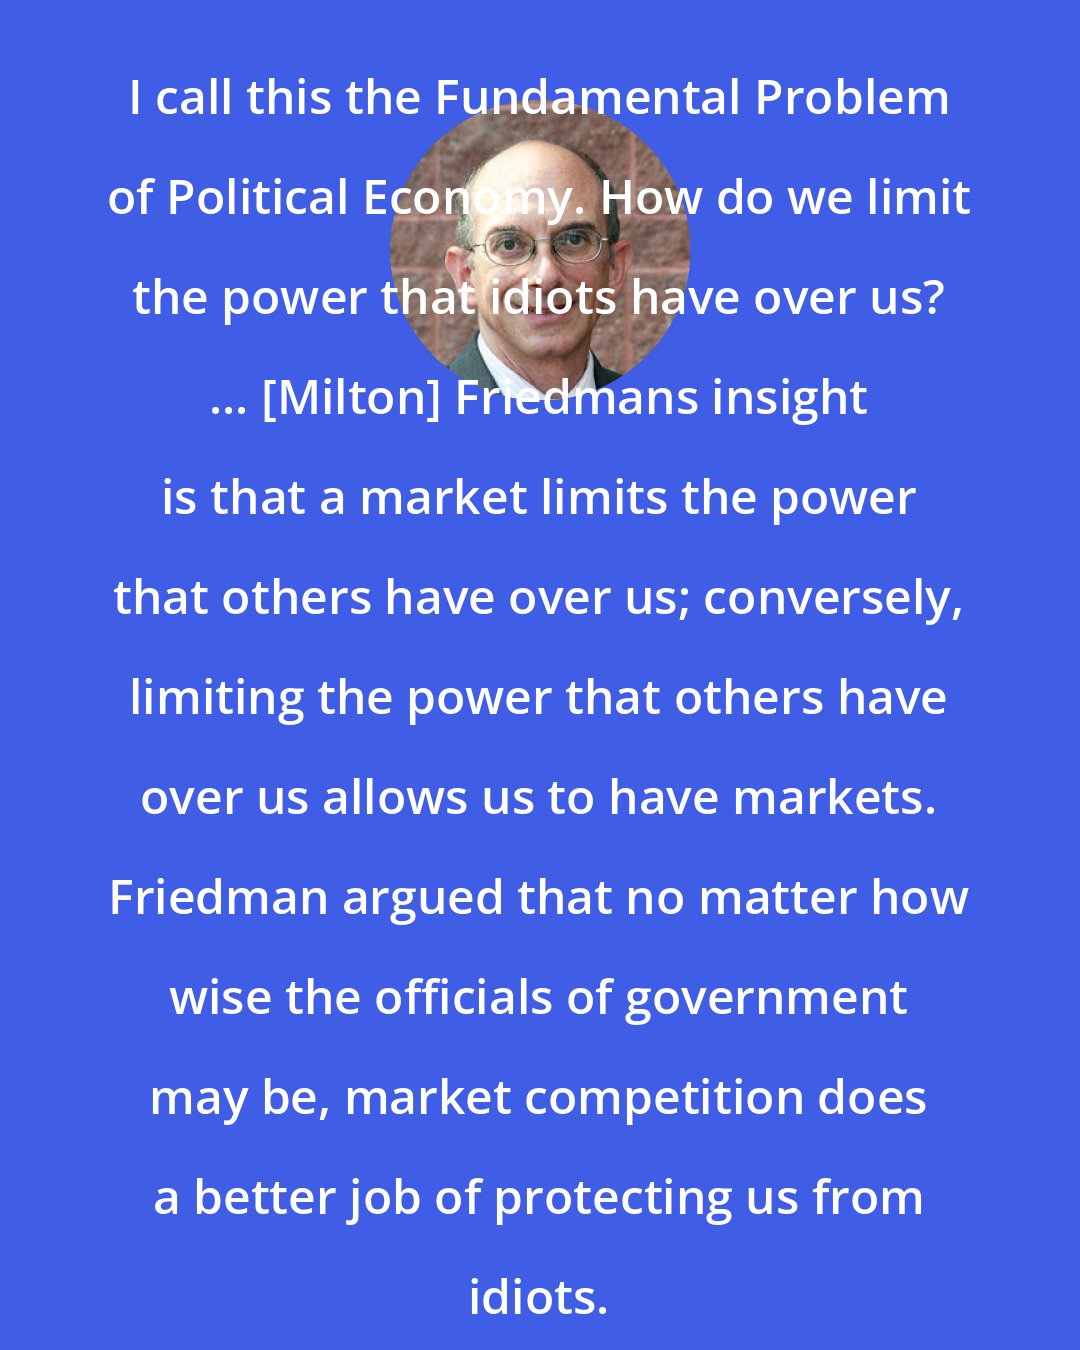 Arnold Kling: I call this the Fundamental Problem of Political Economy. How do we limit the power that idiots have over us? ... [Milton] Friedmans insight is that a market limits the power that others have over us; conversely, limiting the power that others have over us allows us to have markets. Friedman argued that no matter how wise the officials of government may be, market competition does a better job of protecting us from idiots.